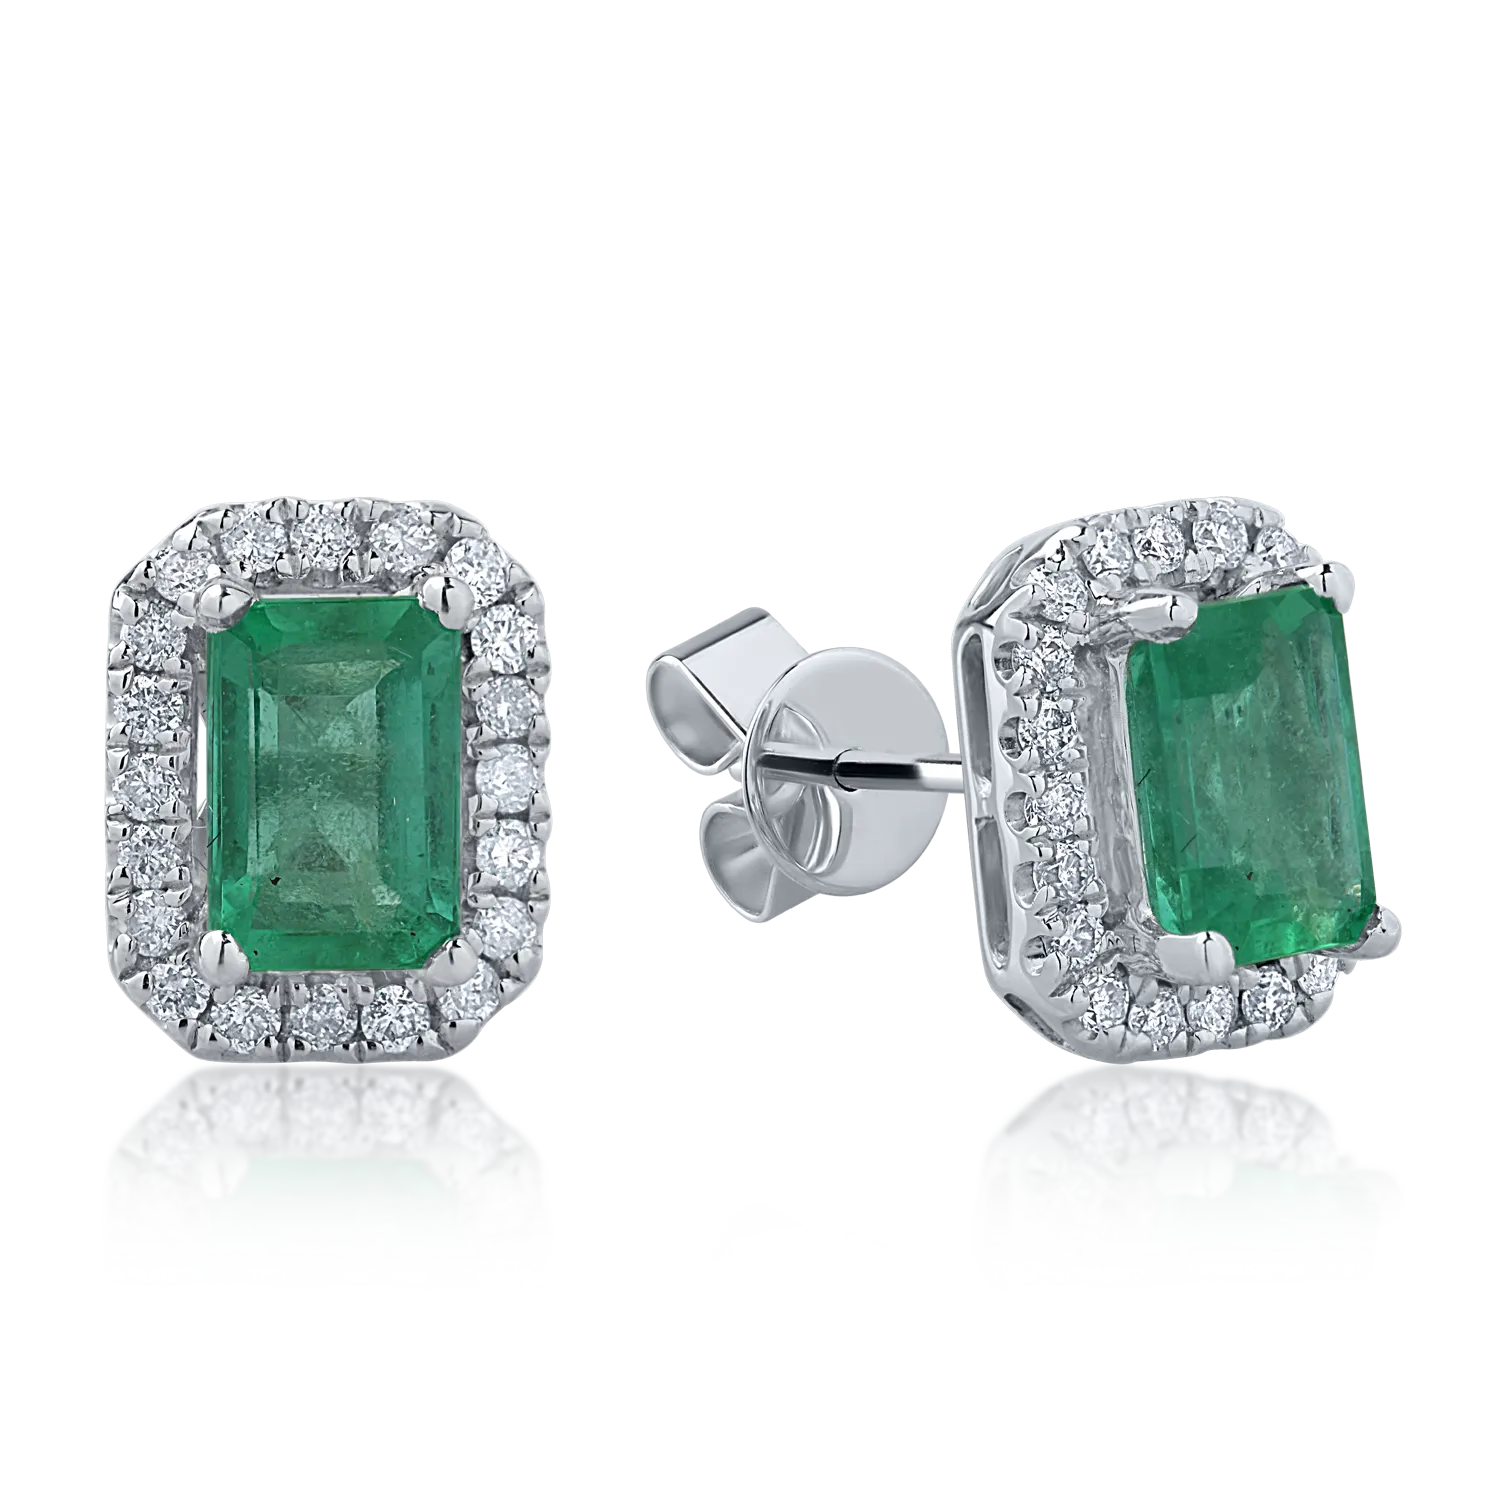 White gold earrings with 1.17ct emeralds and 0.26ct diamonds